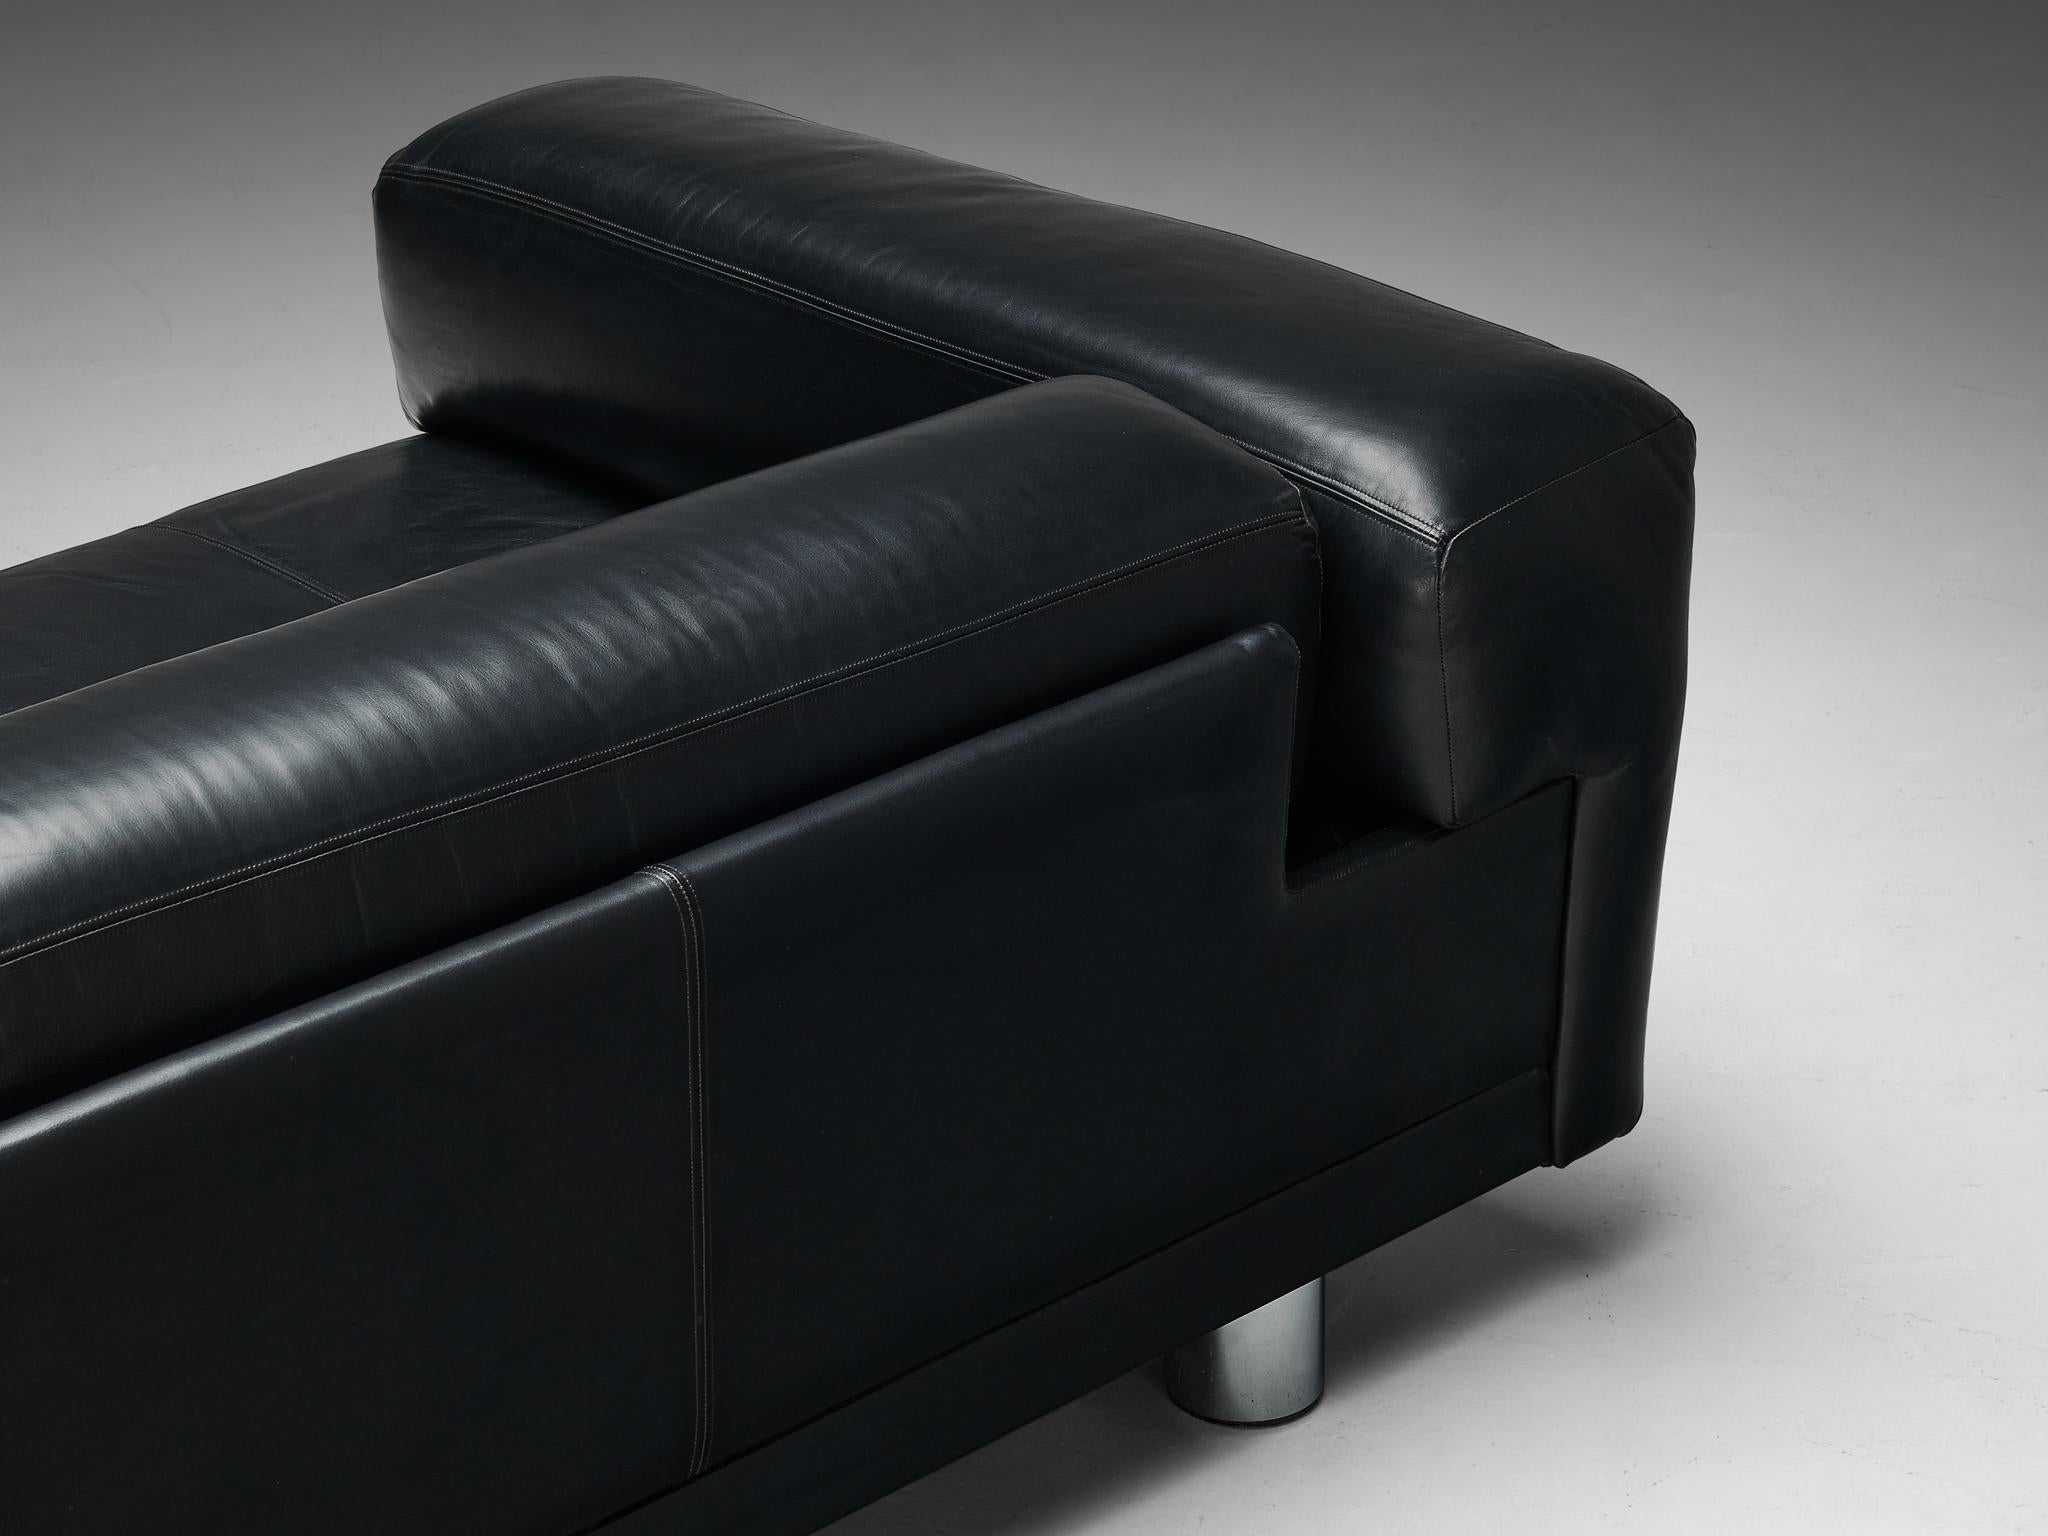 Howard Keith 'Diplomat' Sofa in Black Leather  In Good Condition For Sale In Waalwijk, NL